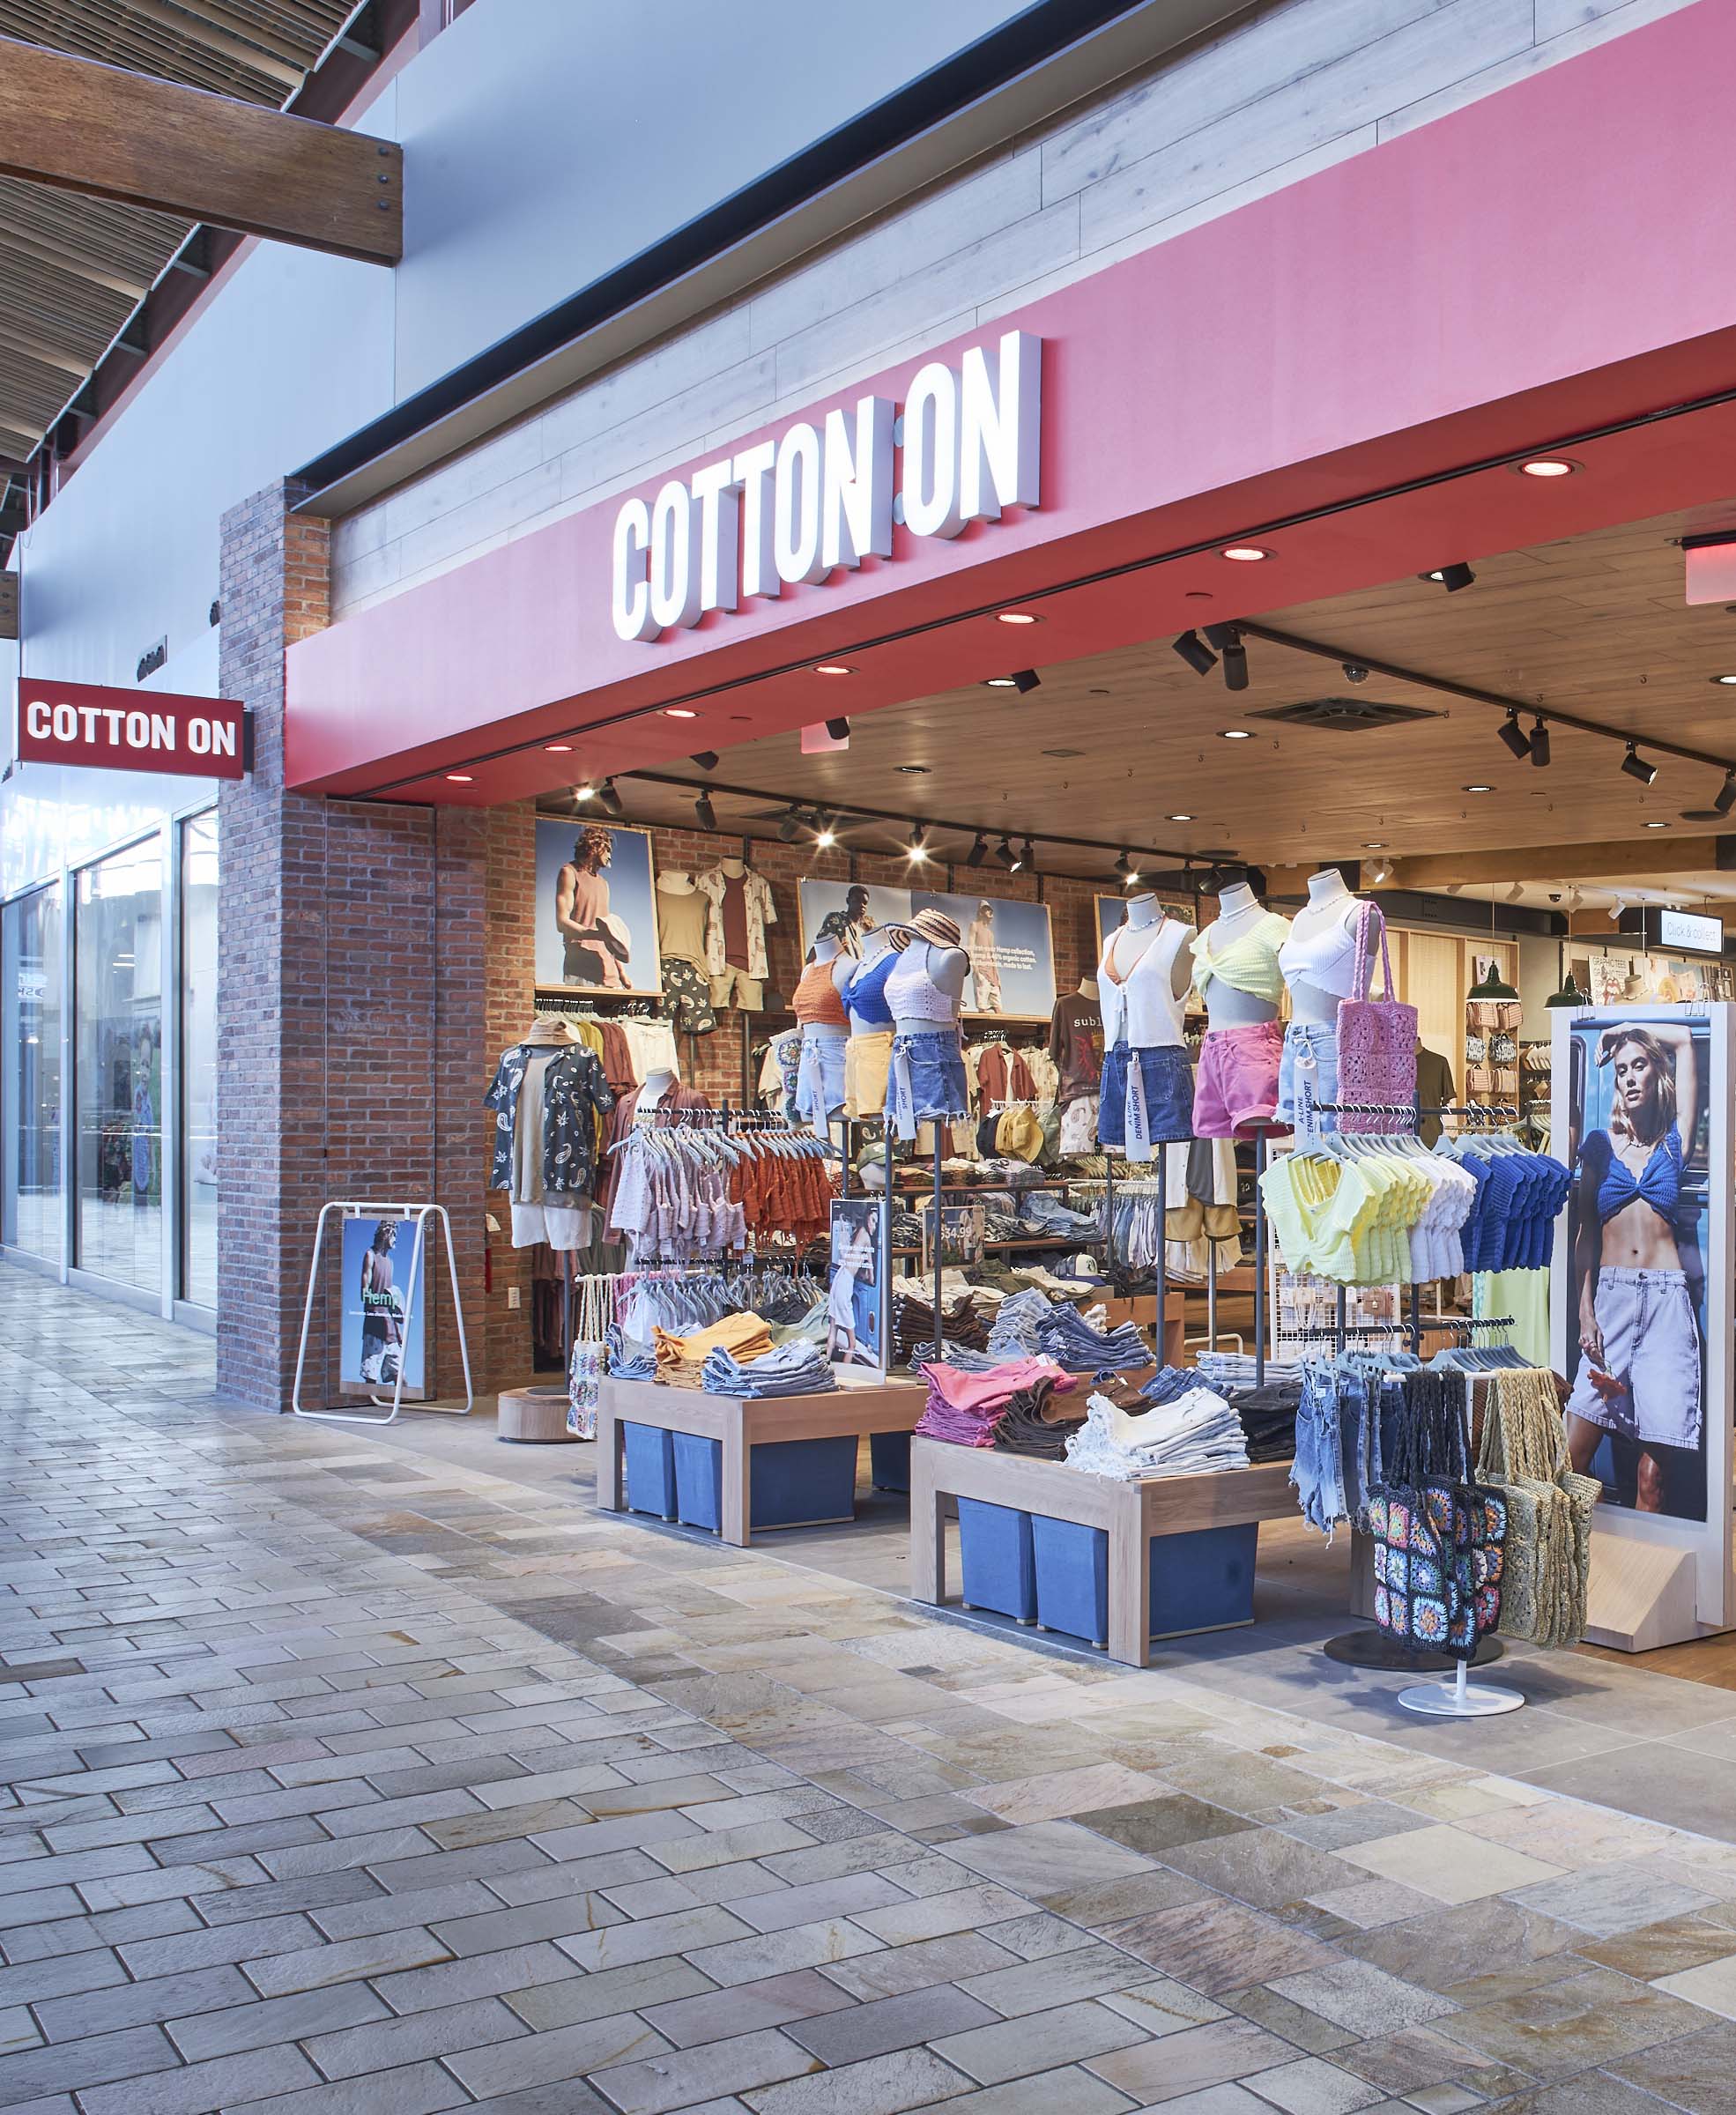 Cotton On storefront from FlatIron Crossing